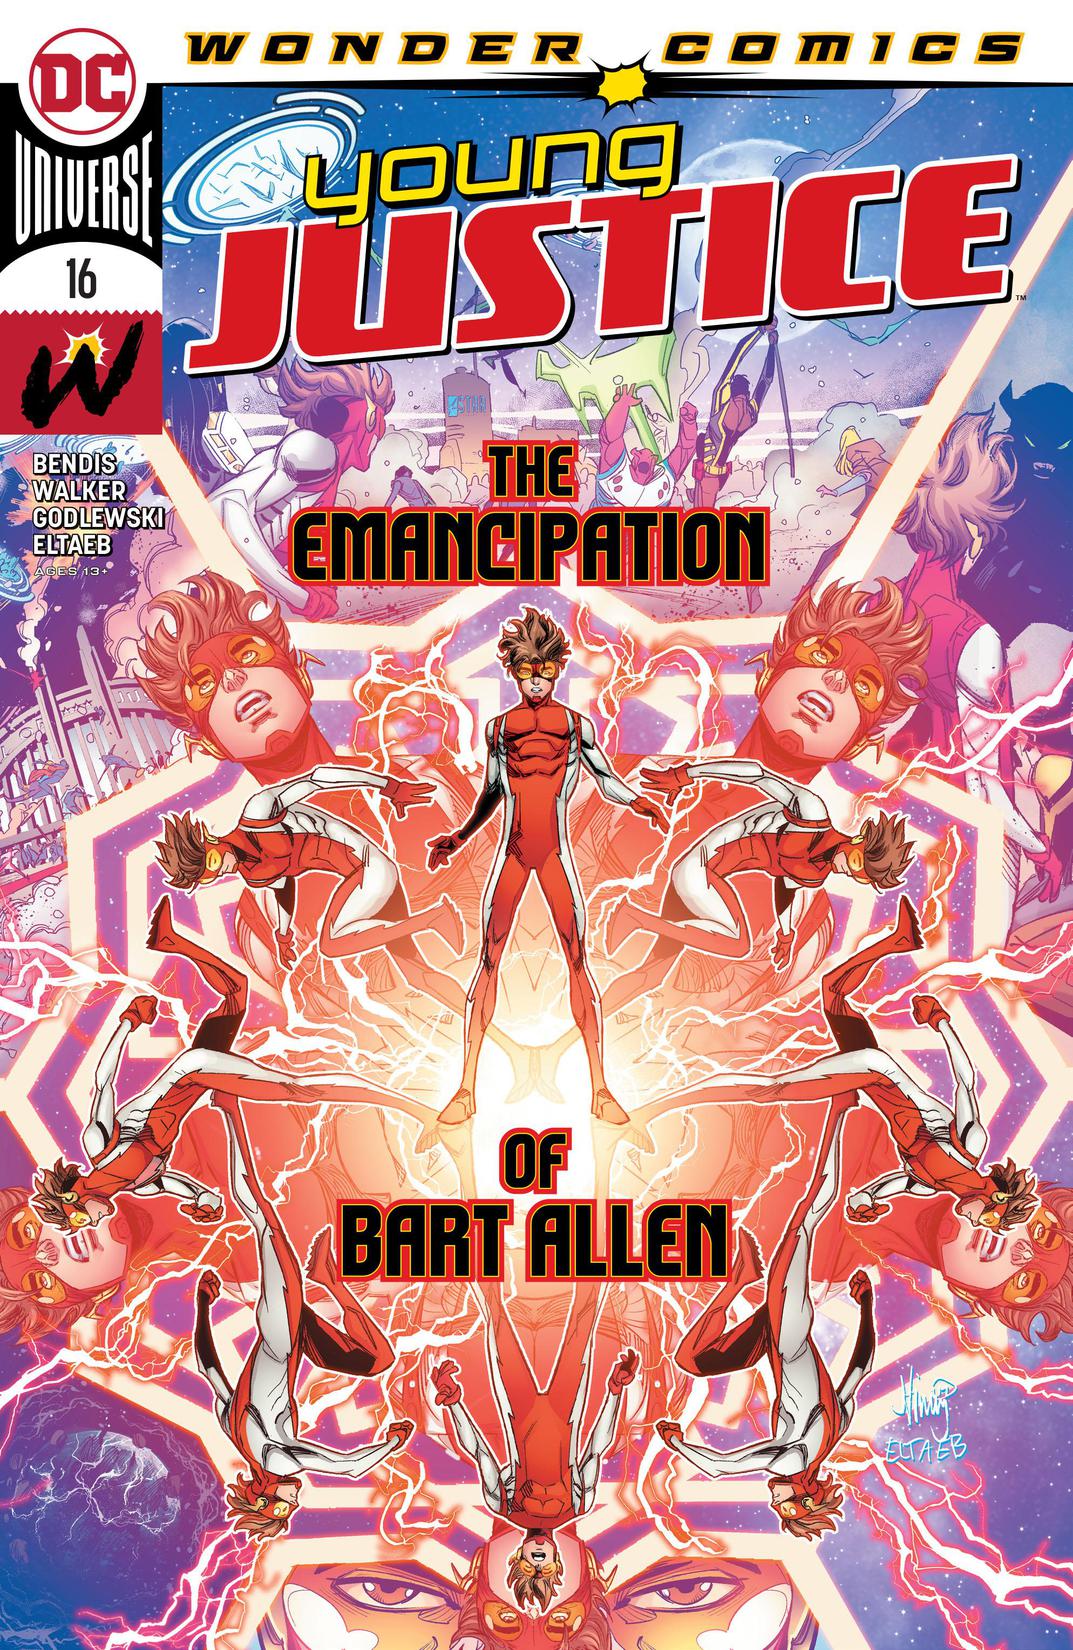 Young Justice (2019-) #16 preview images